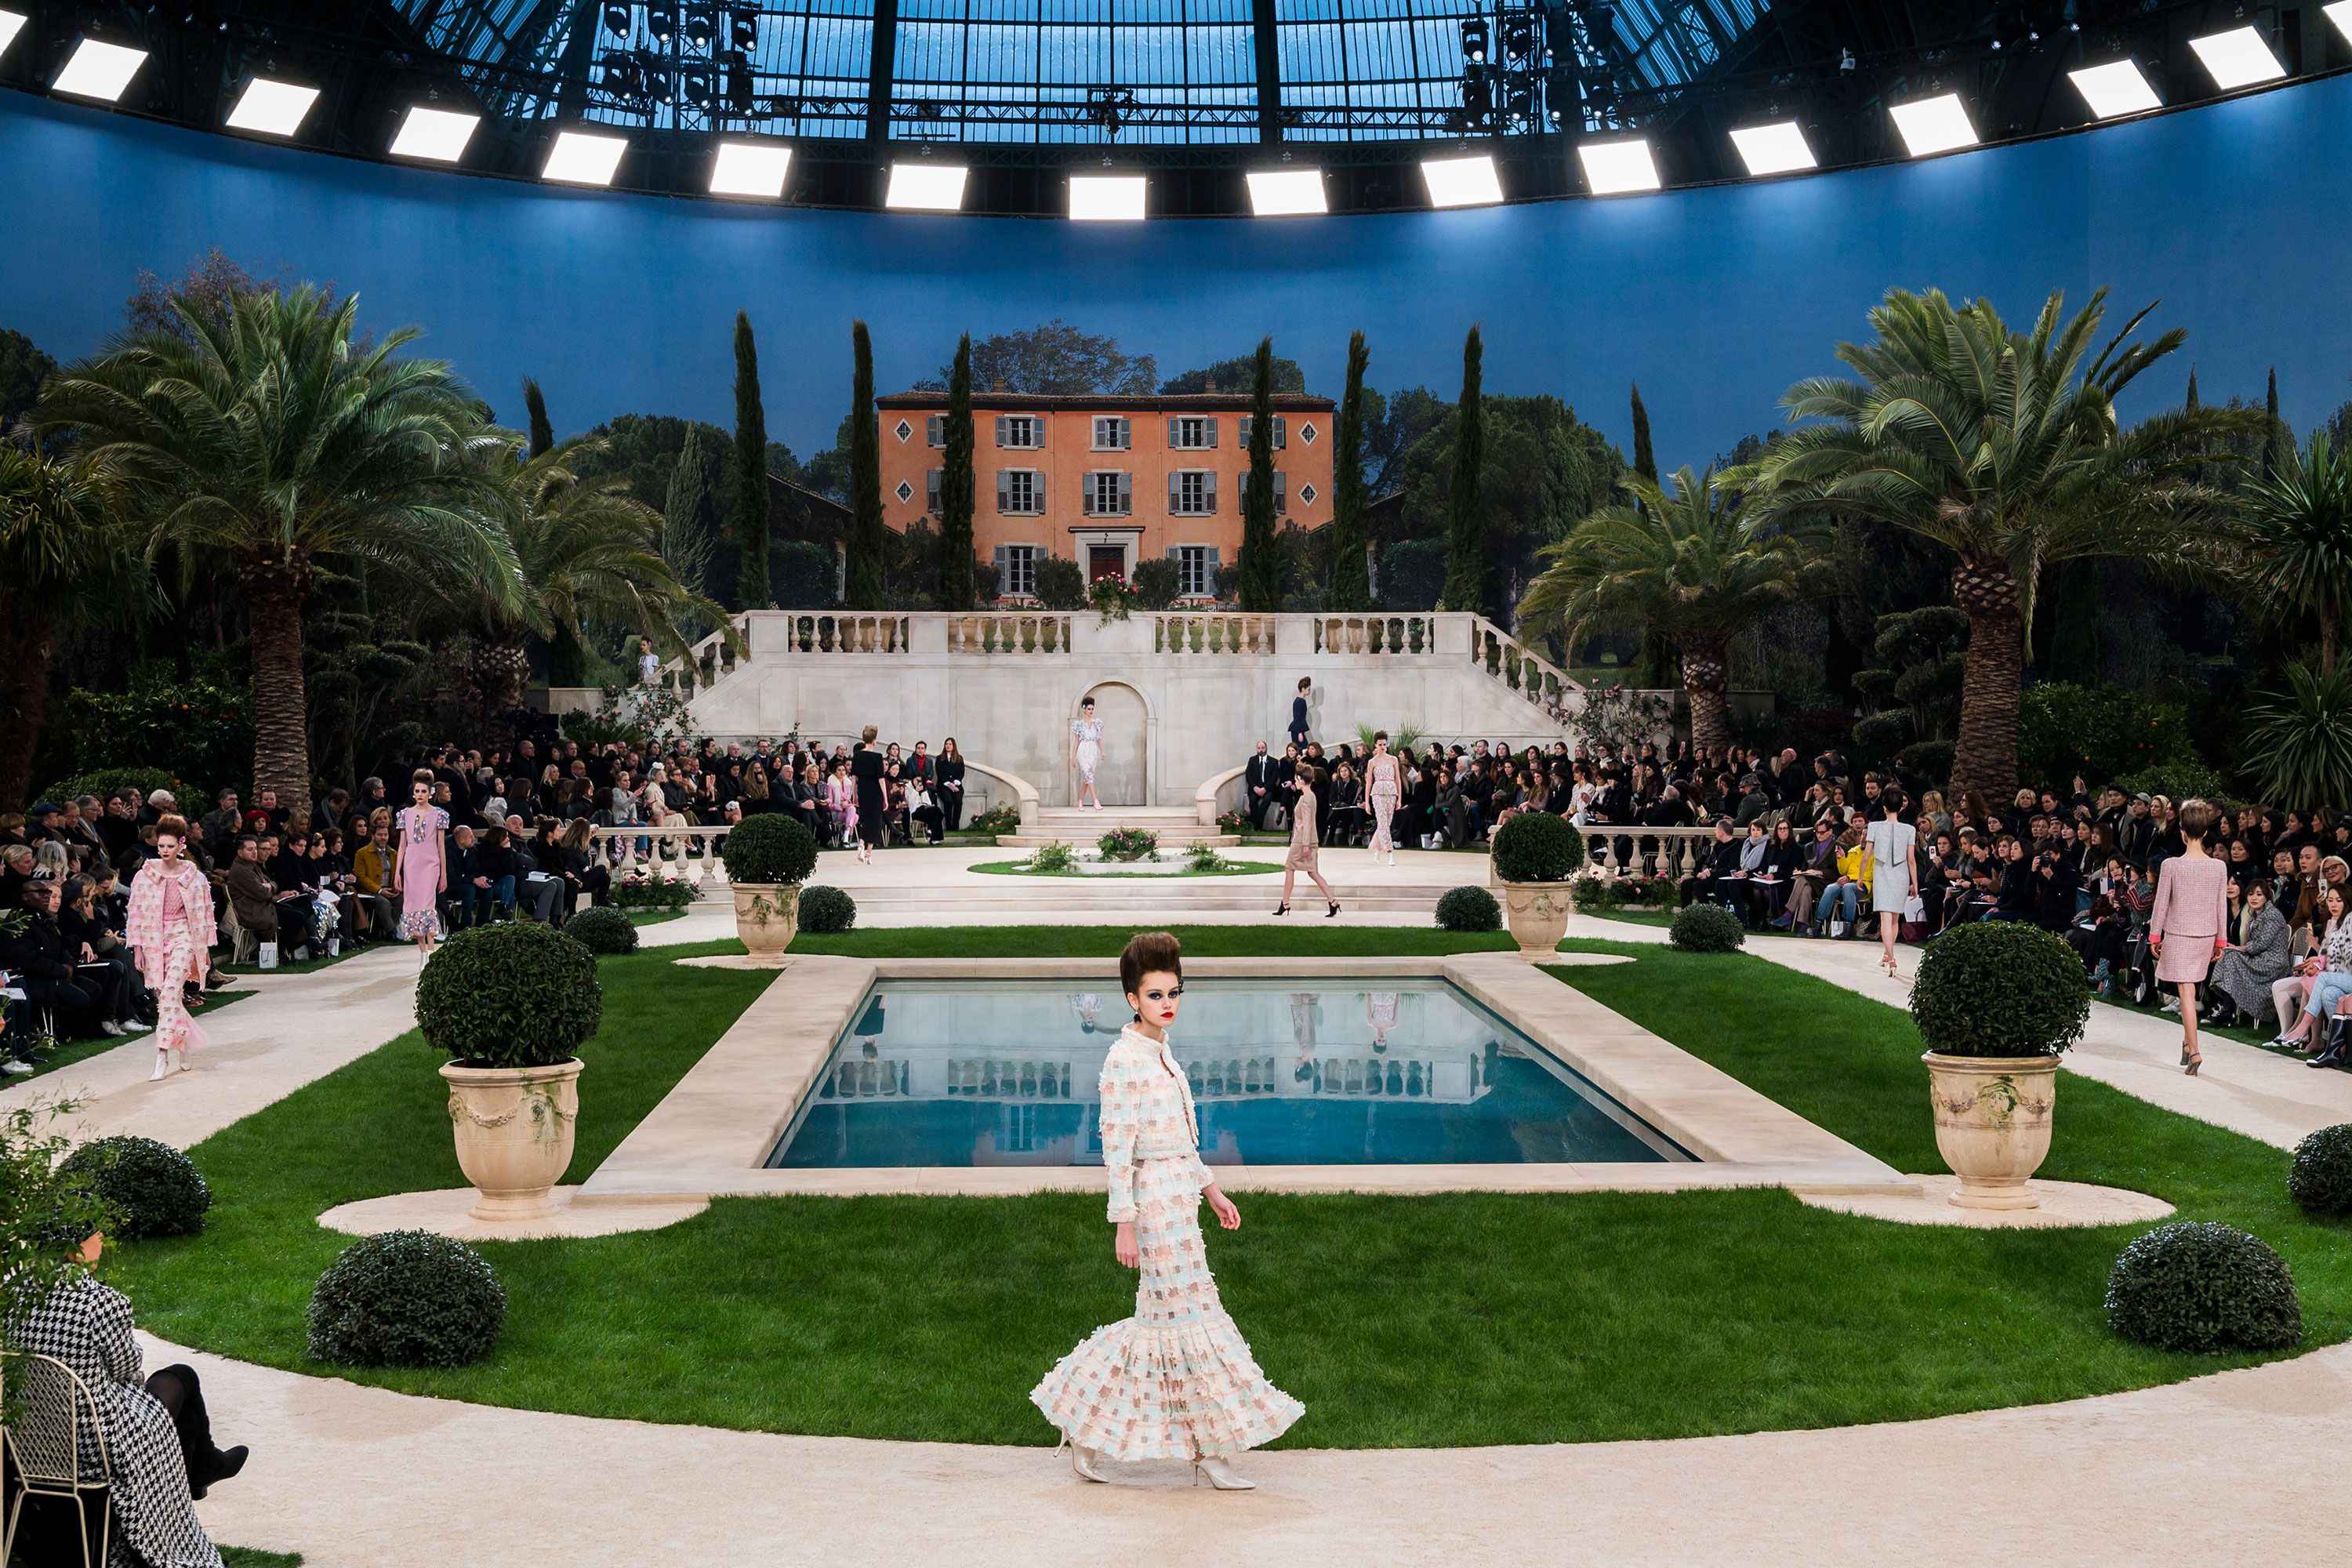 Karl Lagerfeld missed the Chanel couture show today